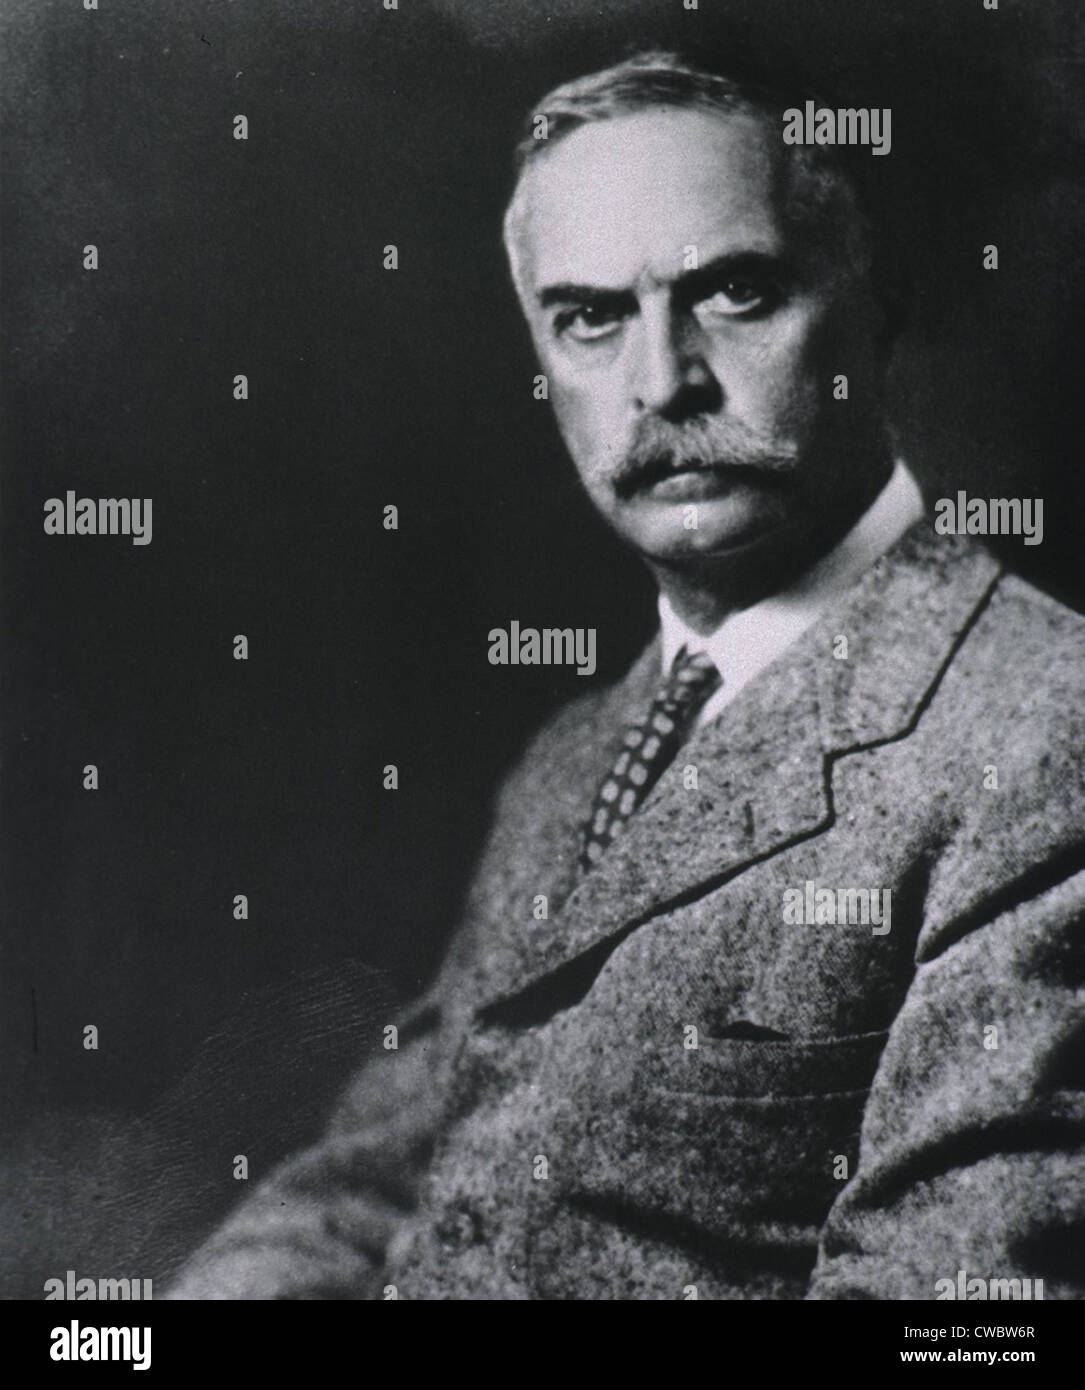 Karl Landsteiner (1868-1943), Austrian American immunologist discovered human blood existed in different groups, which he first Stock Photo